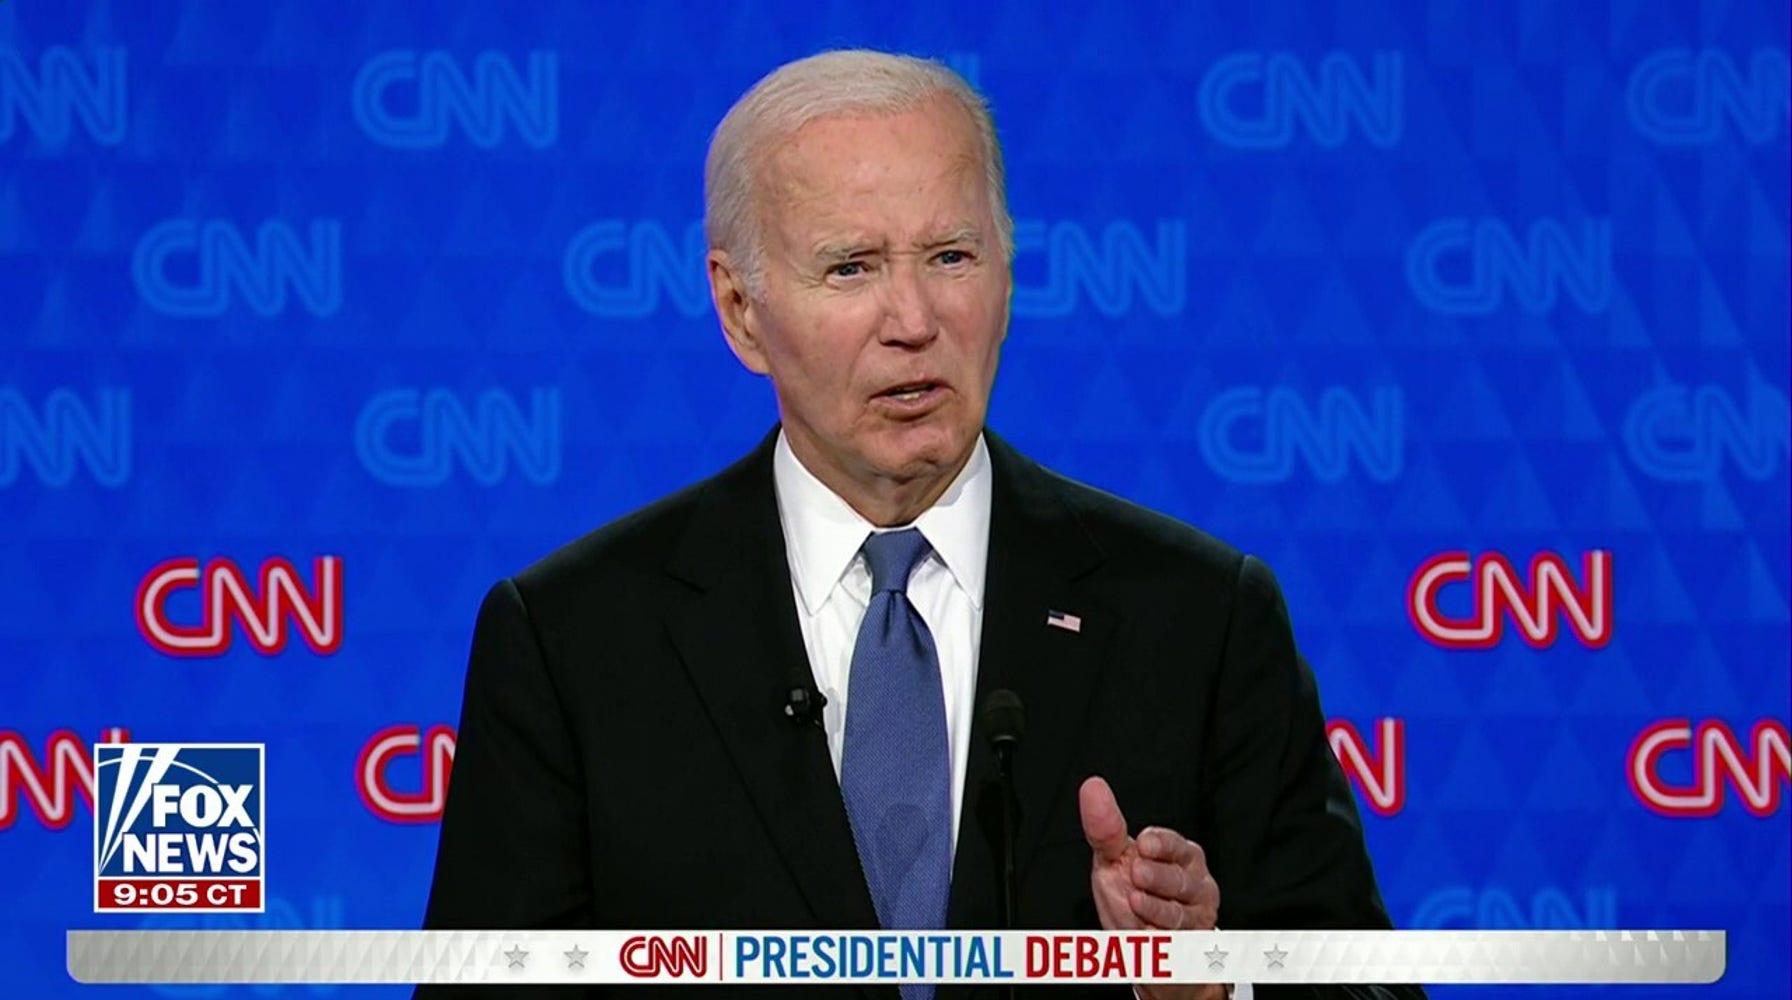 Biden's Performance Raises Concerns Among Democrats, Sparking Questions about 2024 Candidacy